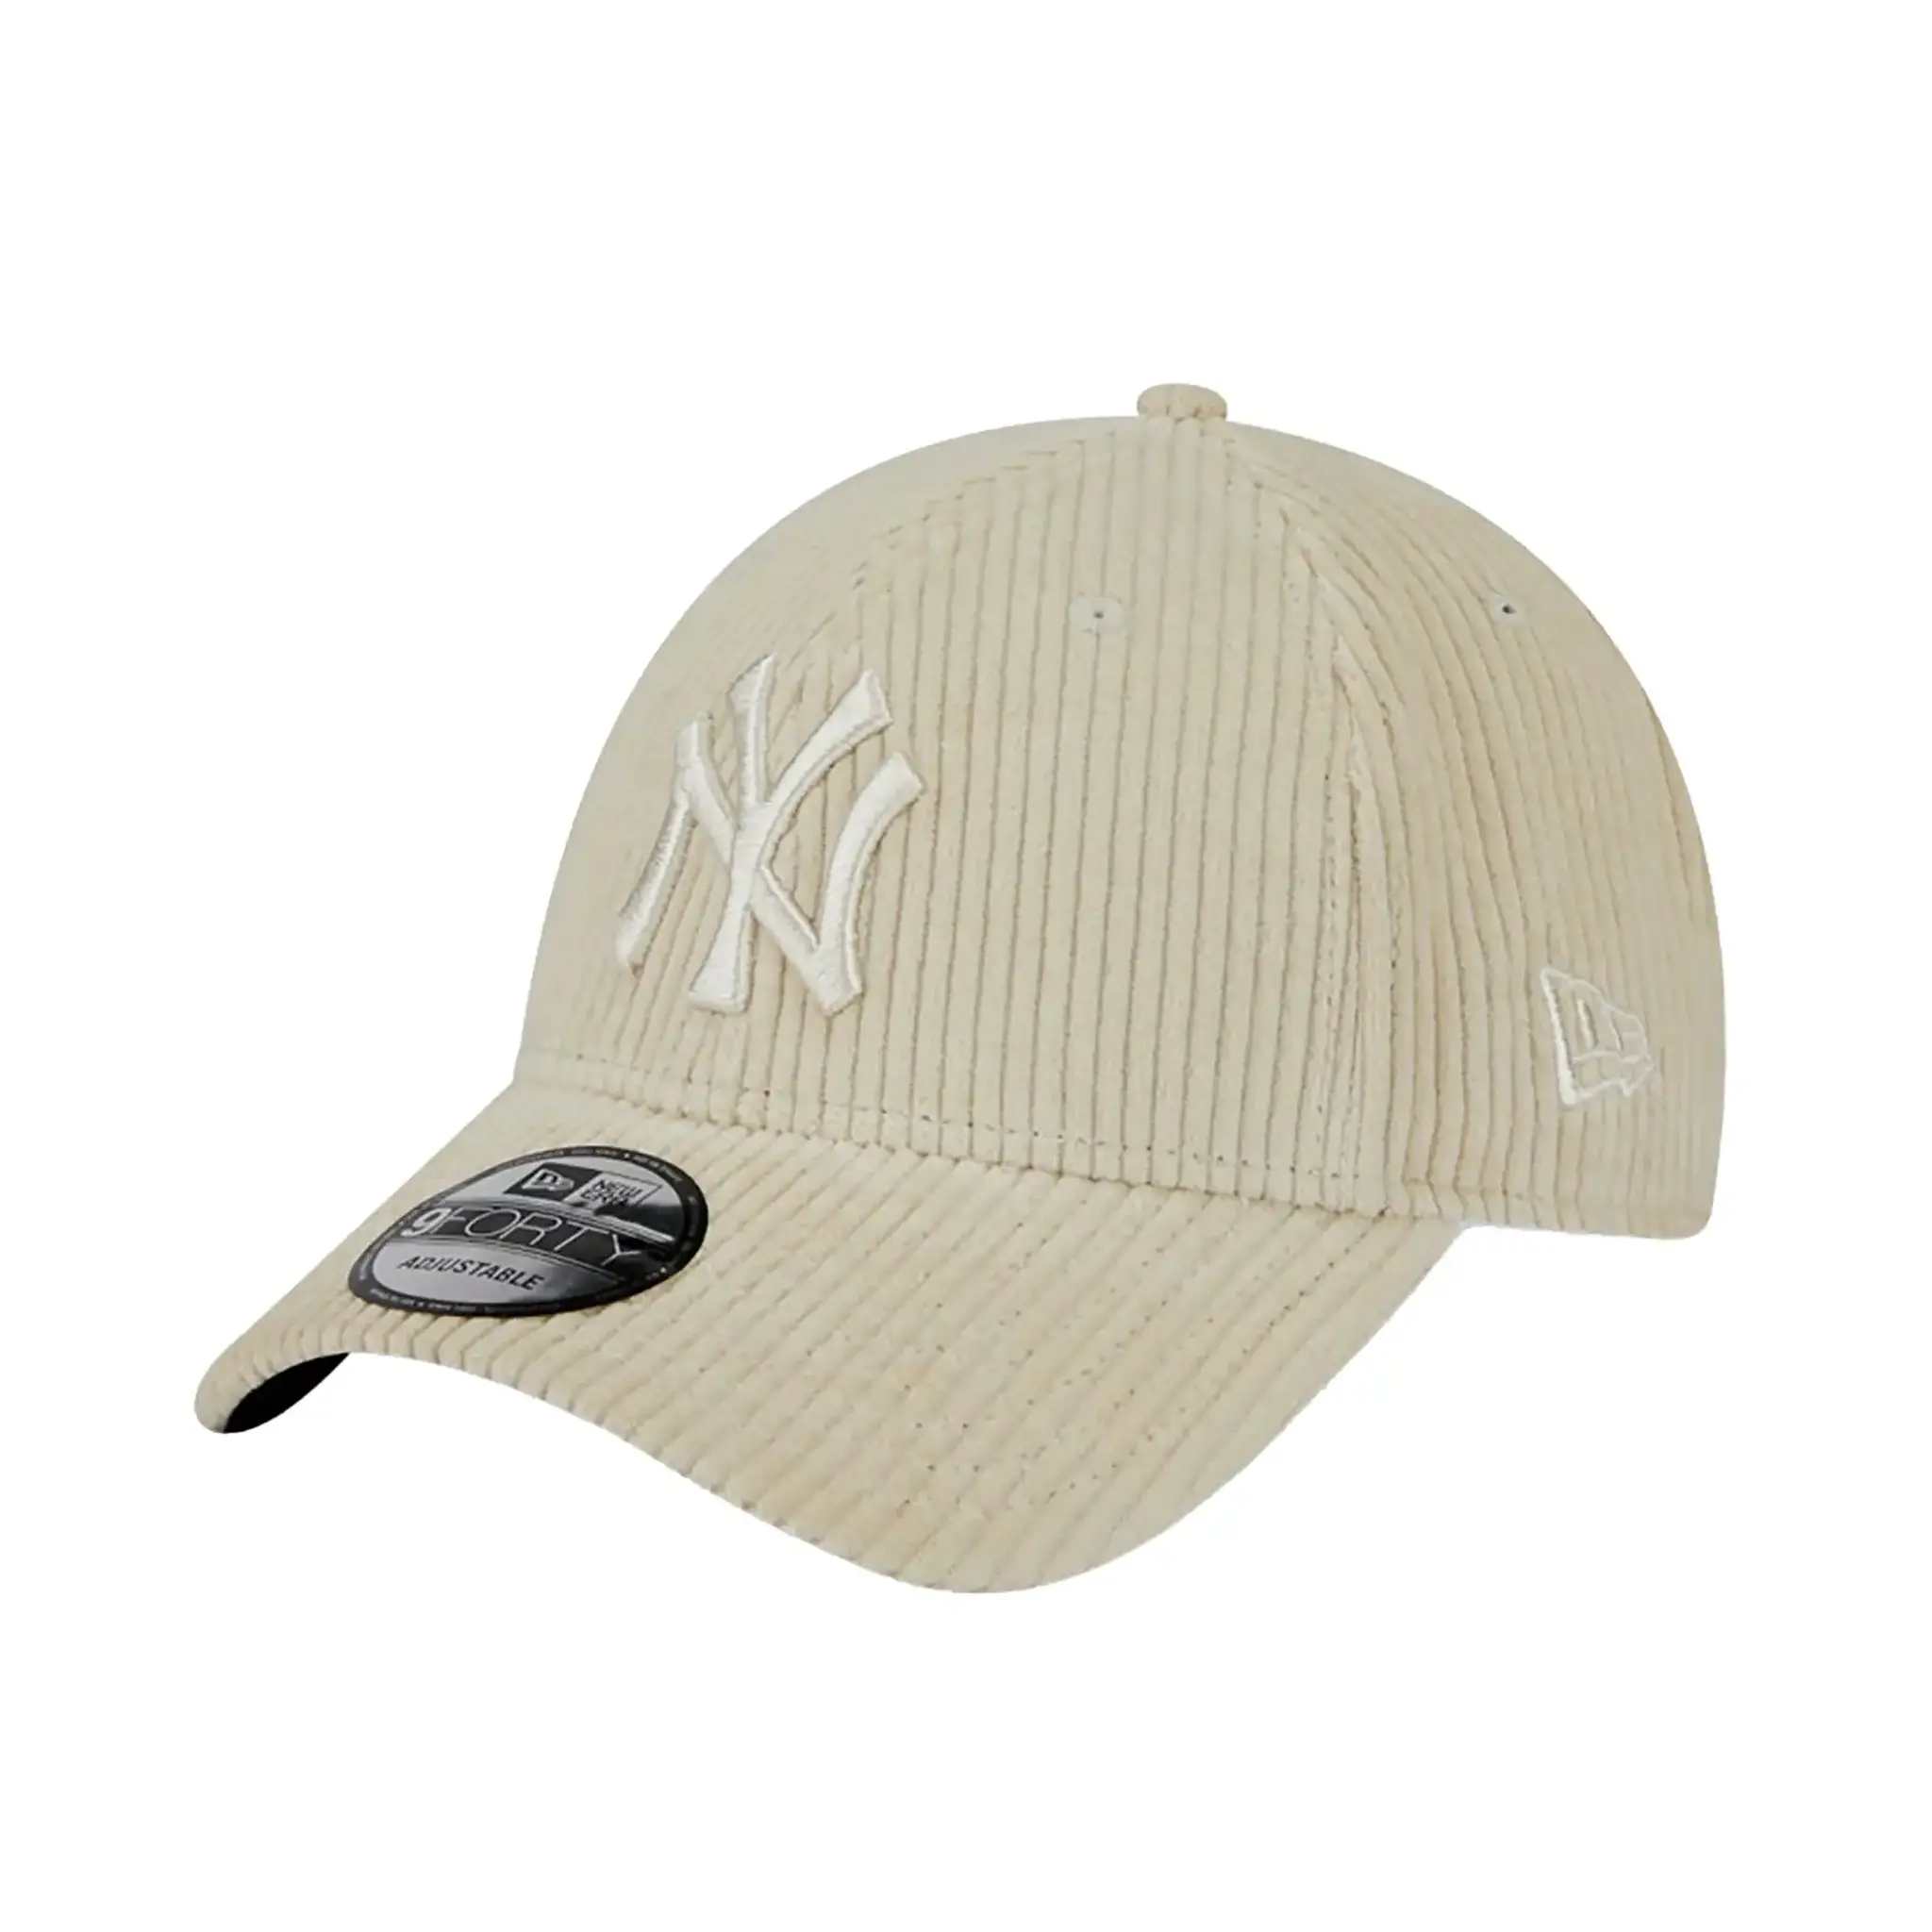 New Era - New York Yankees Wide Cord Stone 9FORTY Adjustable Cap